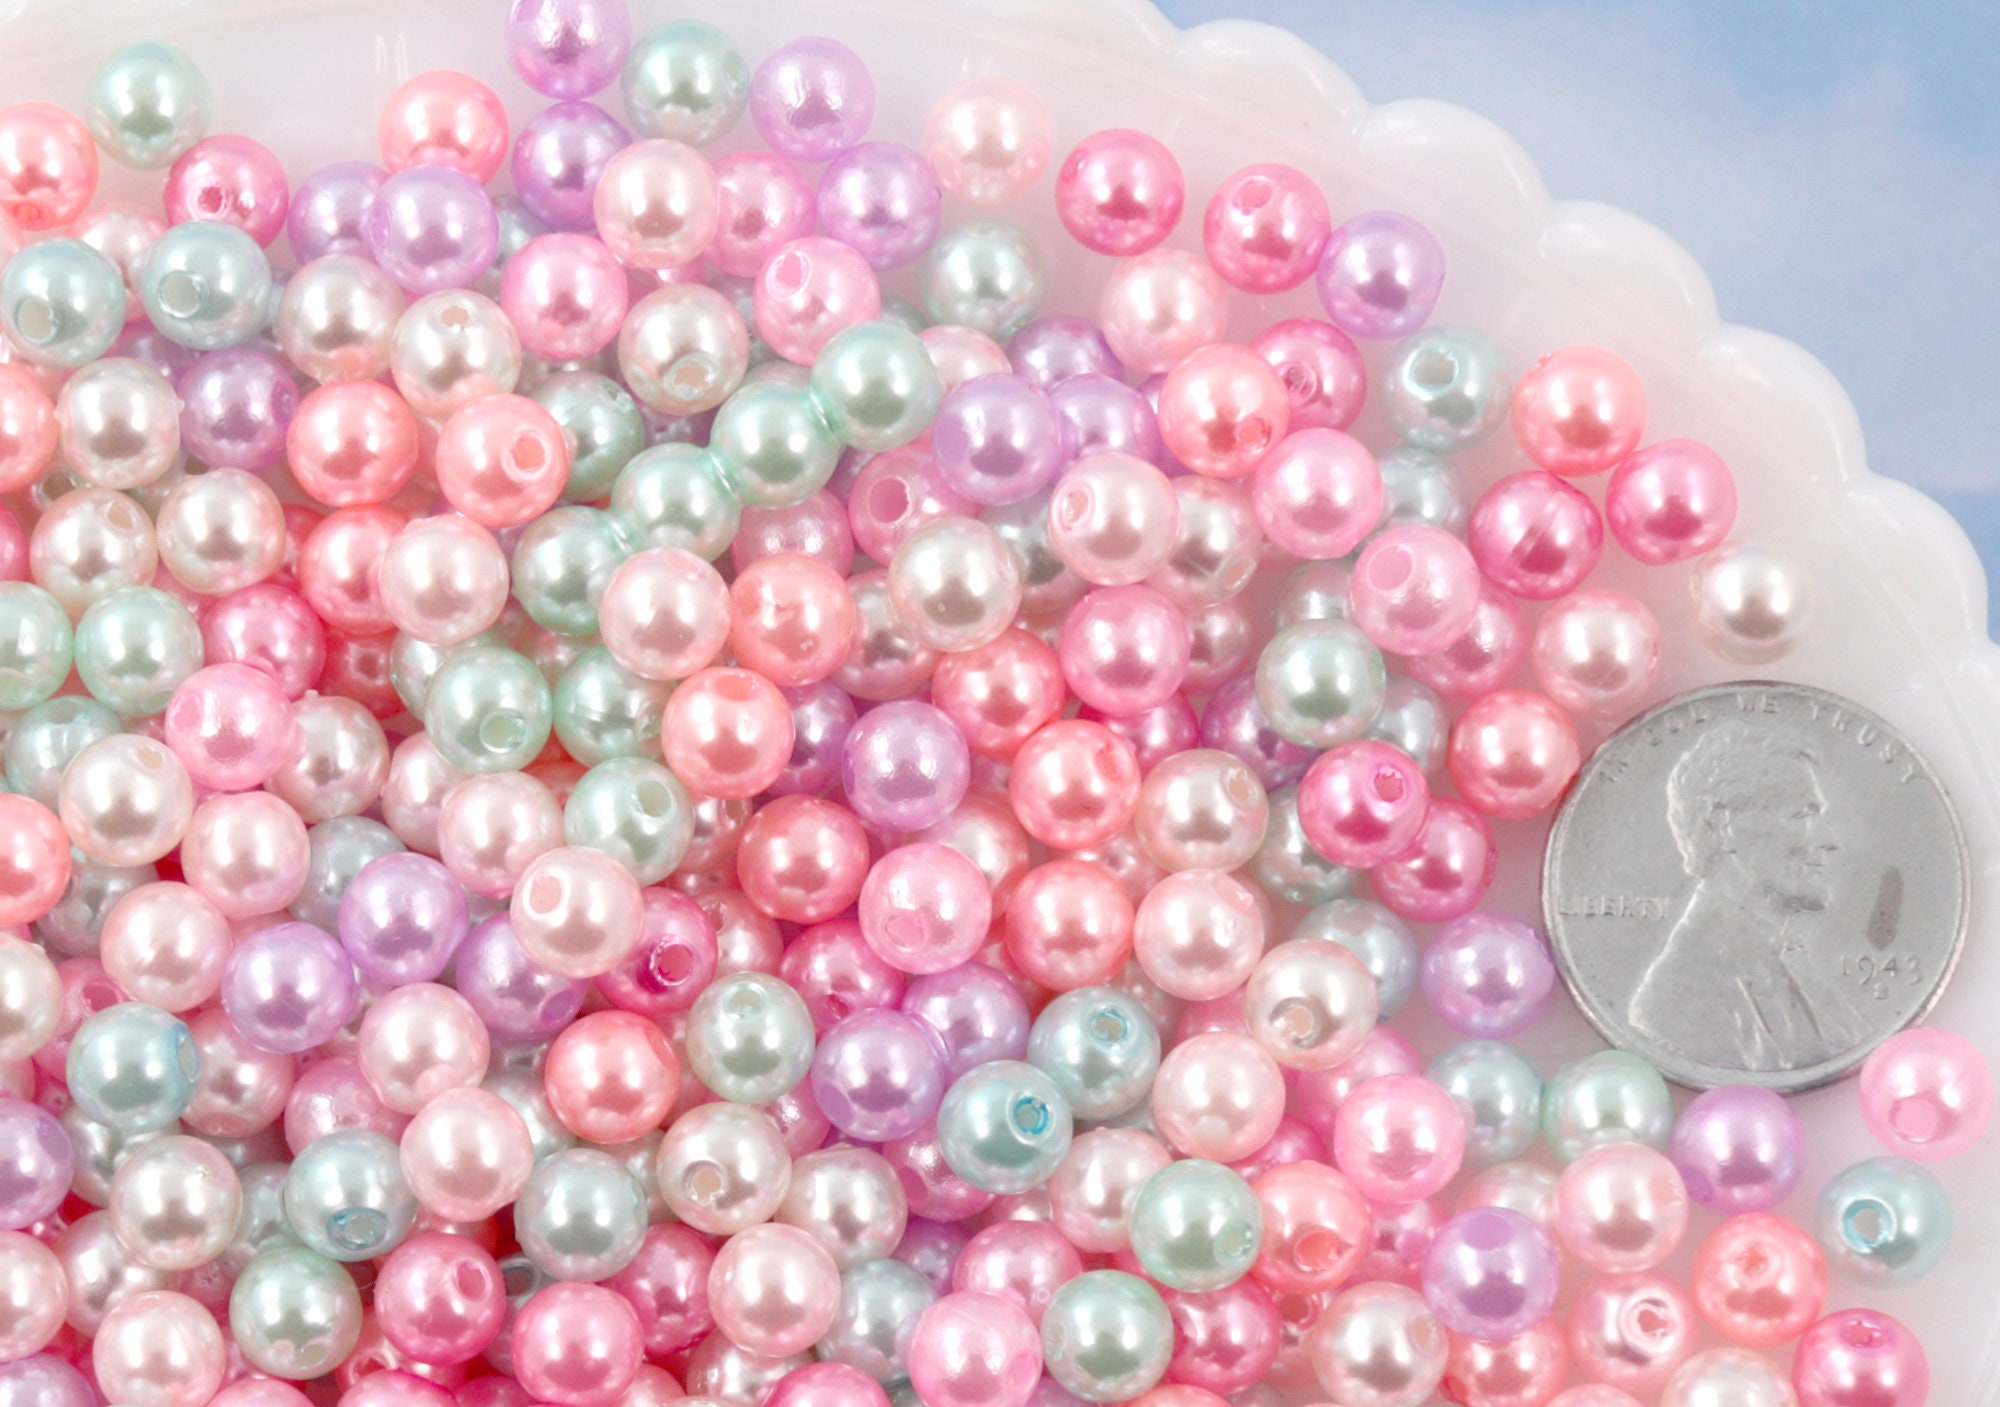 500 pcs Clear Transparent Bubble Beads Plastic Craft Pearls 12mm Round  Smooth